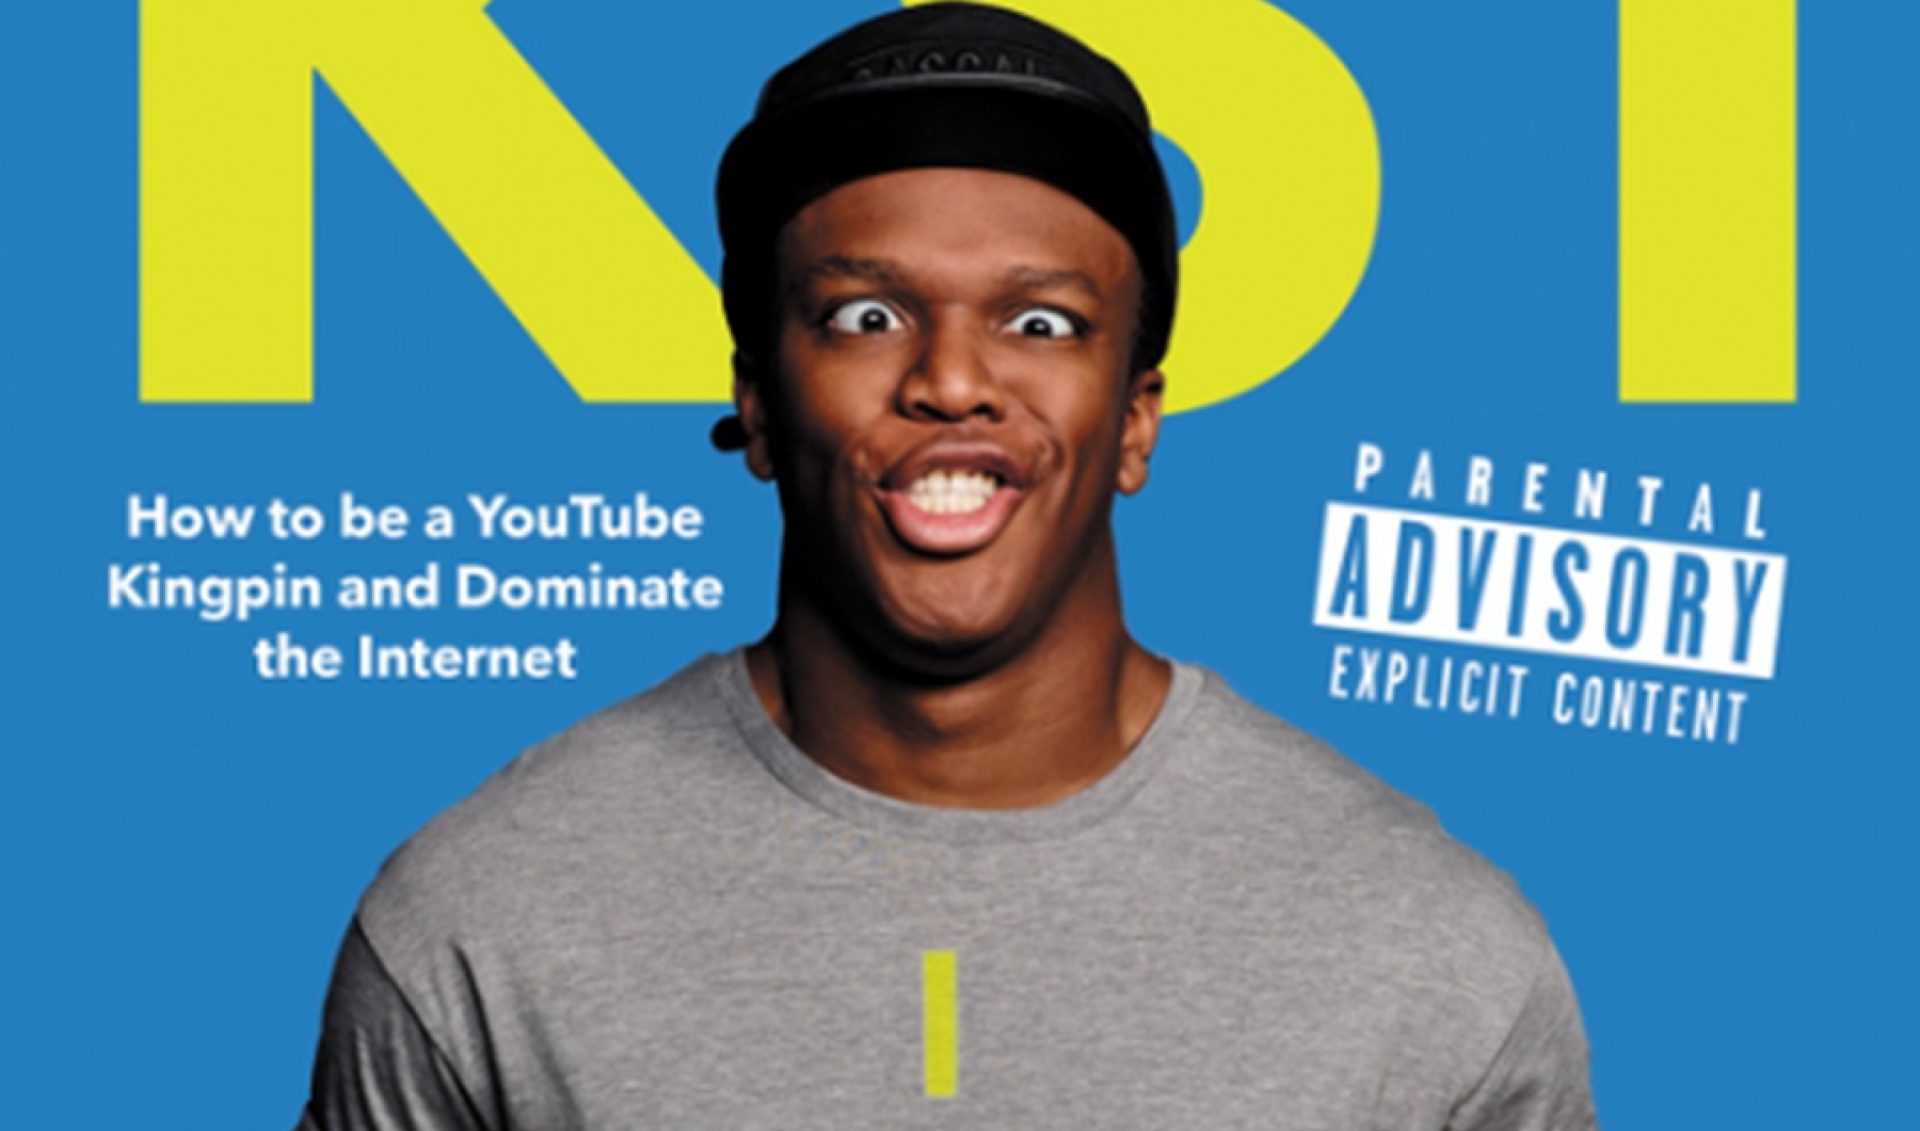 YouTube Star KSI’s New Book Flies Off The Shelves In Two Countries